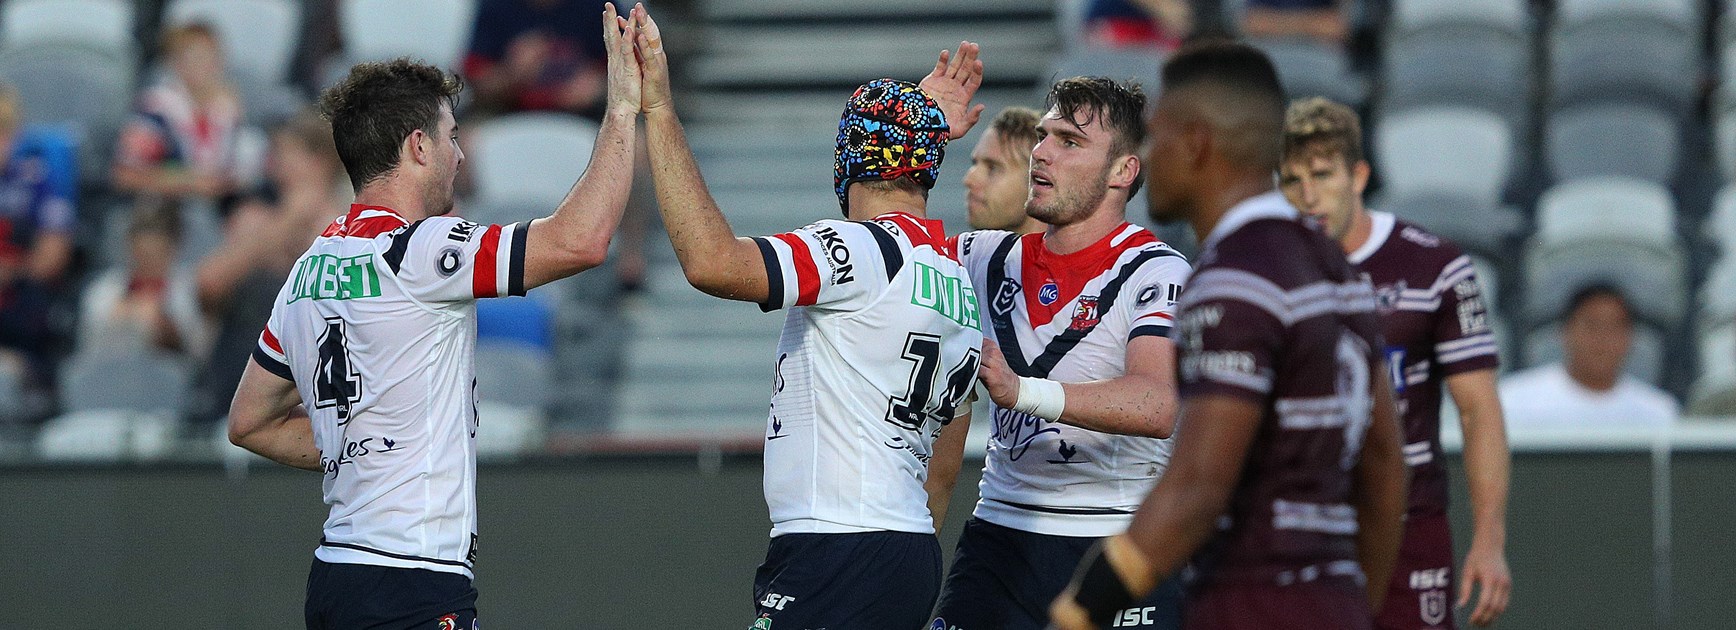 The Roosters celebrate a try against Manly.